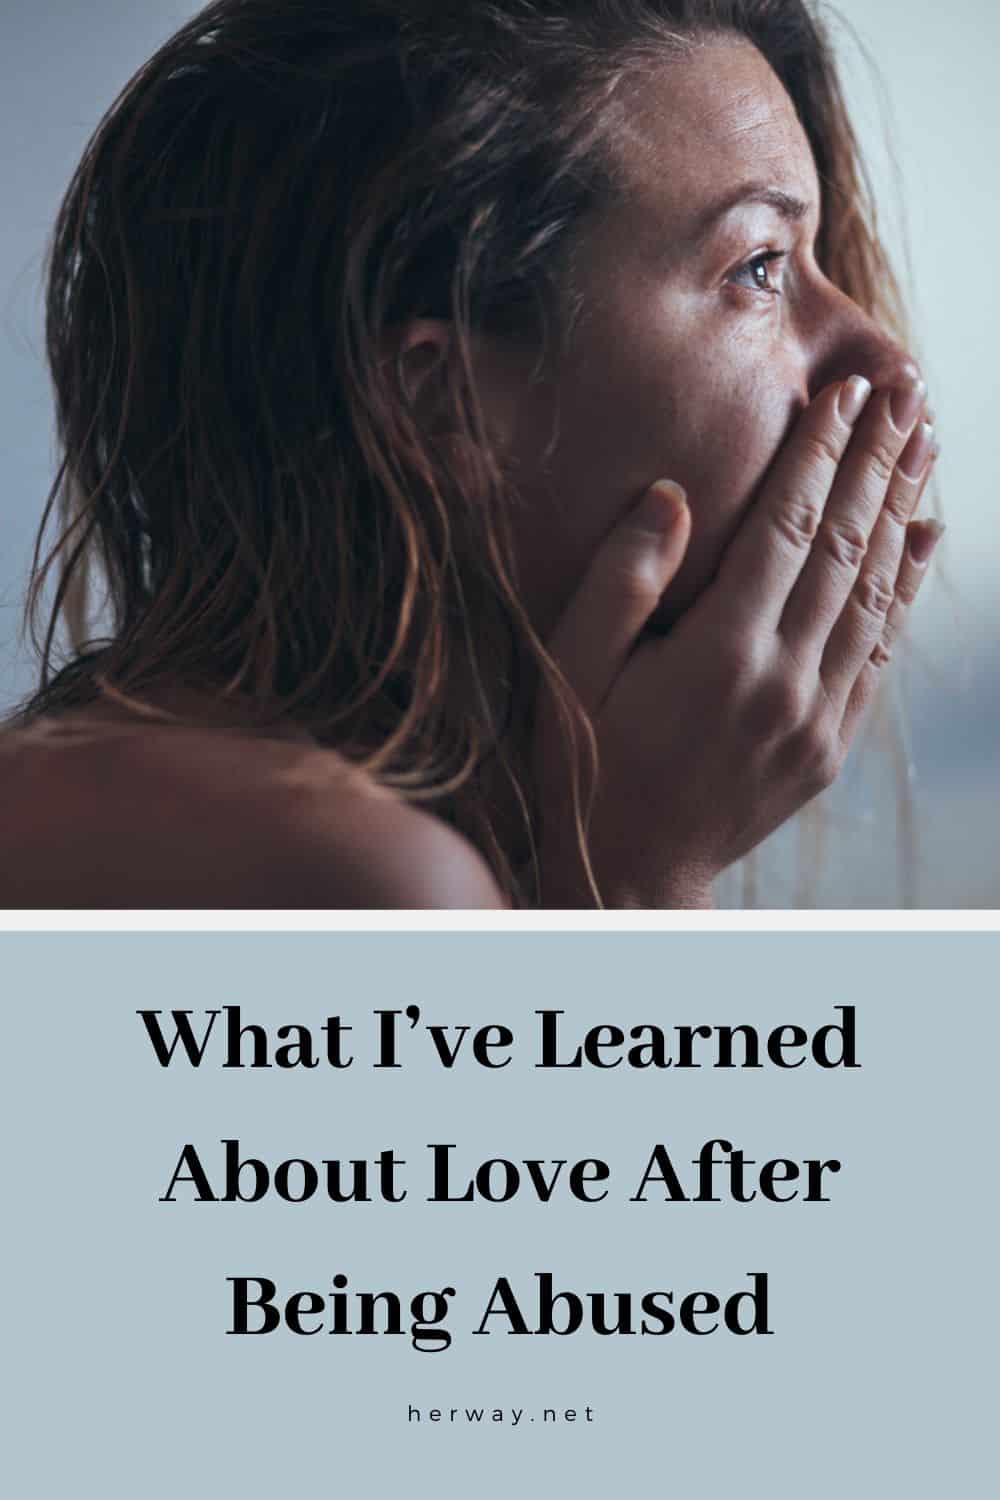 What I’ve Learned About Love After Being Abused